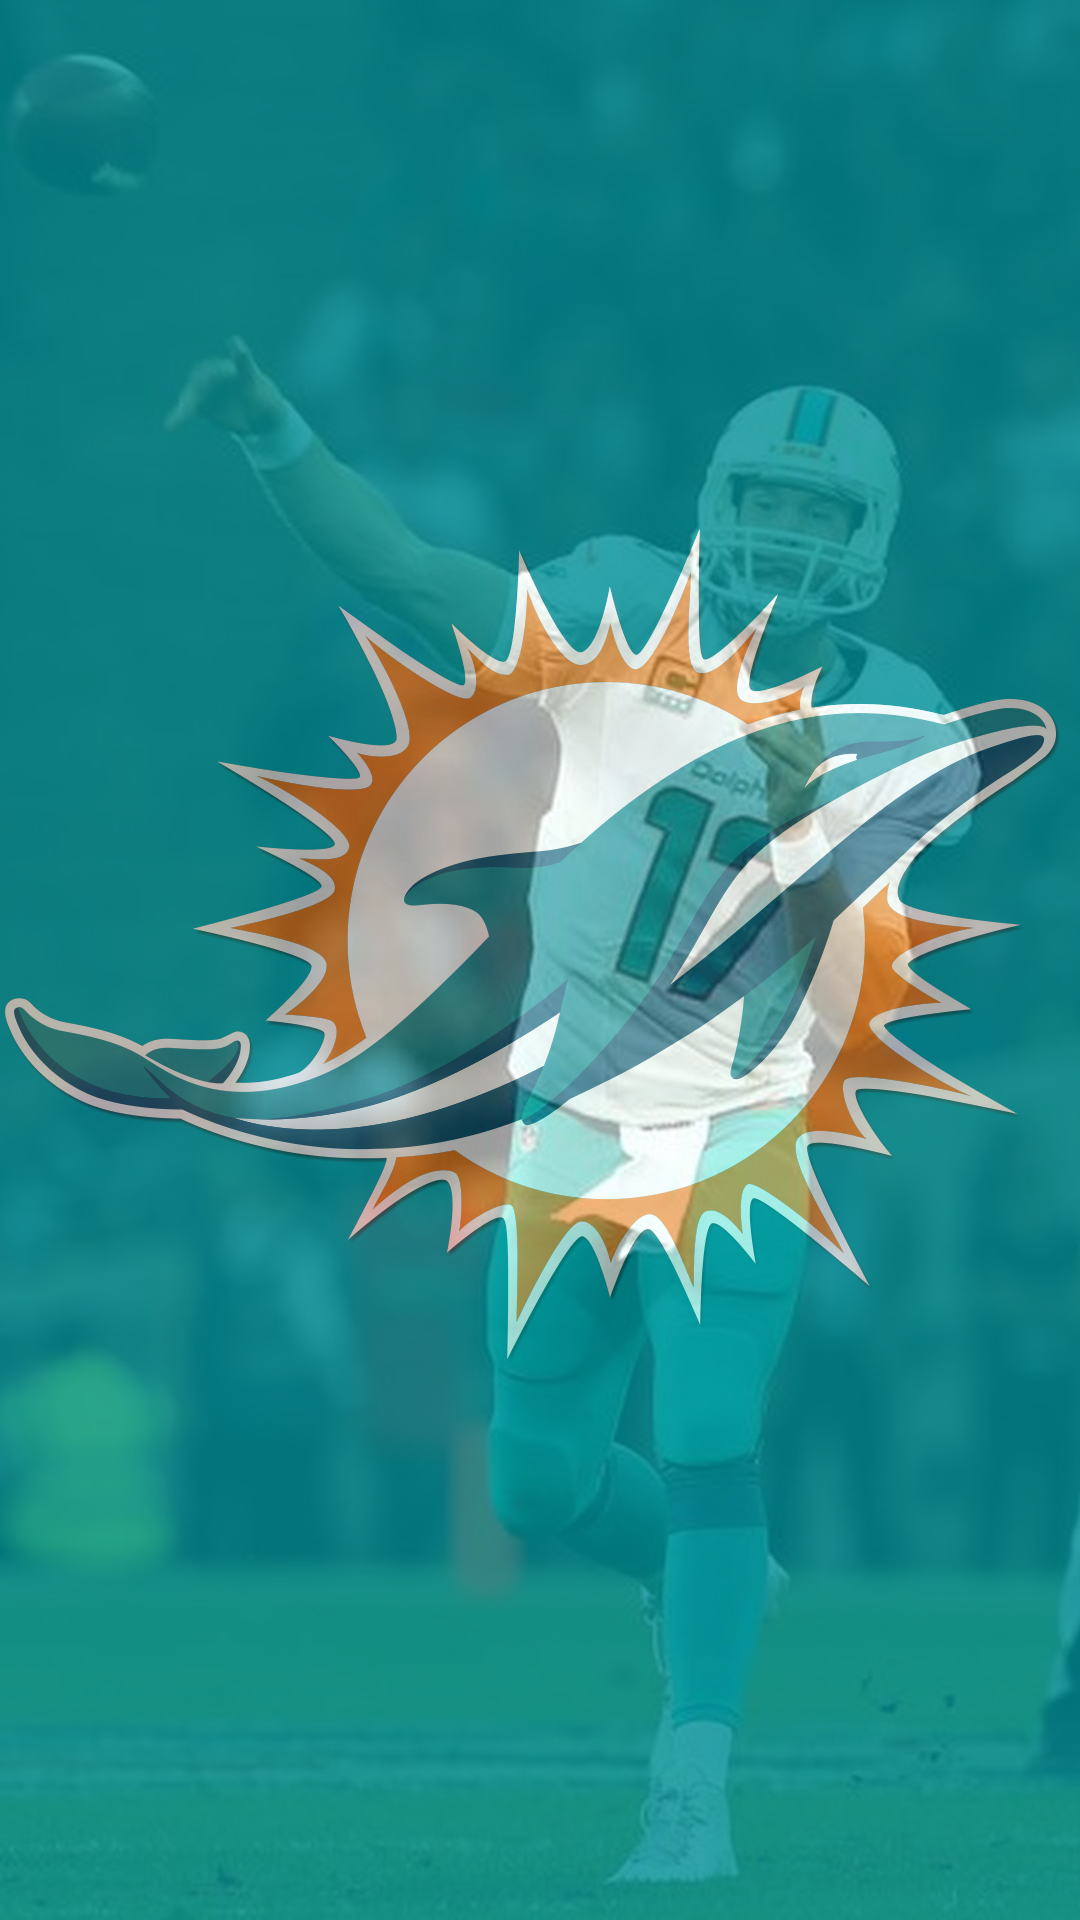 Miami Dolphins Logo 2017 , HD Wallpaper & Backgrounds